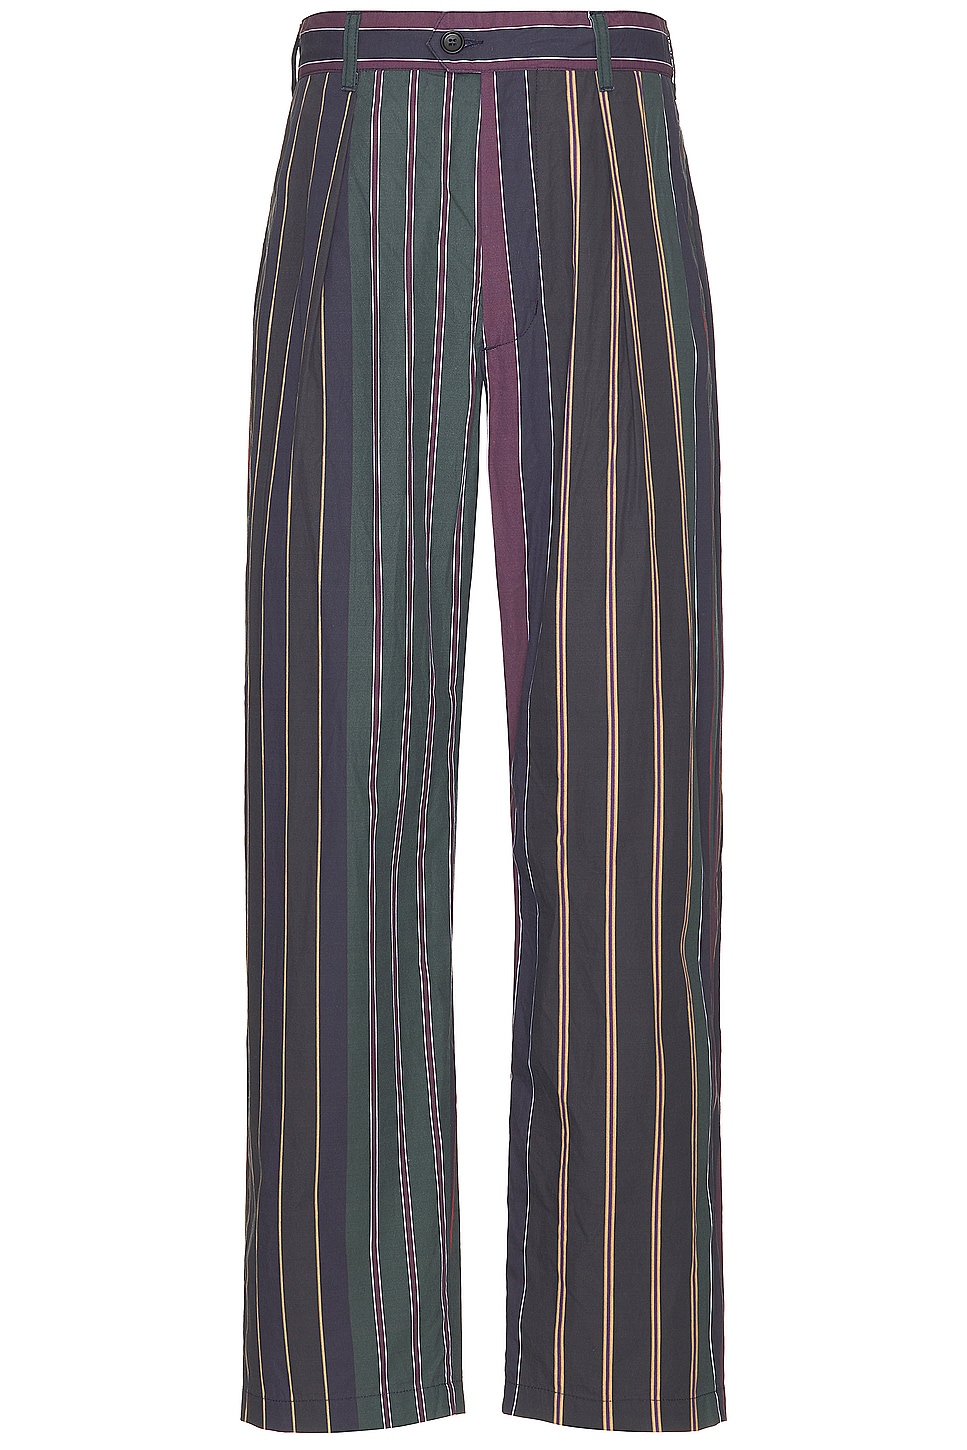 Image 1 of Engineered Garments Carlyle Pant in Multi